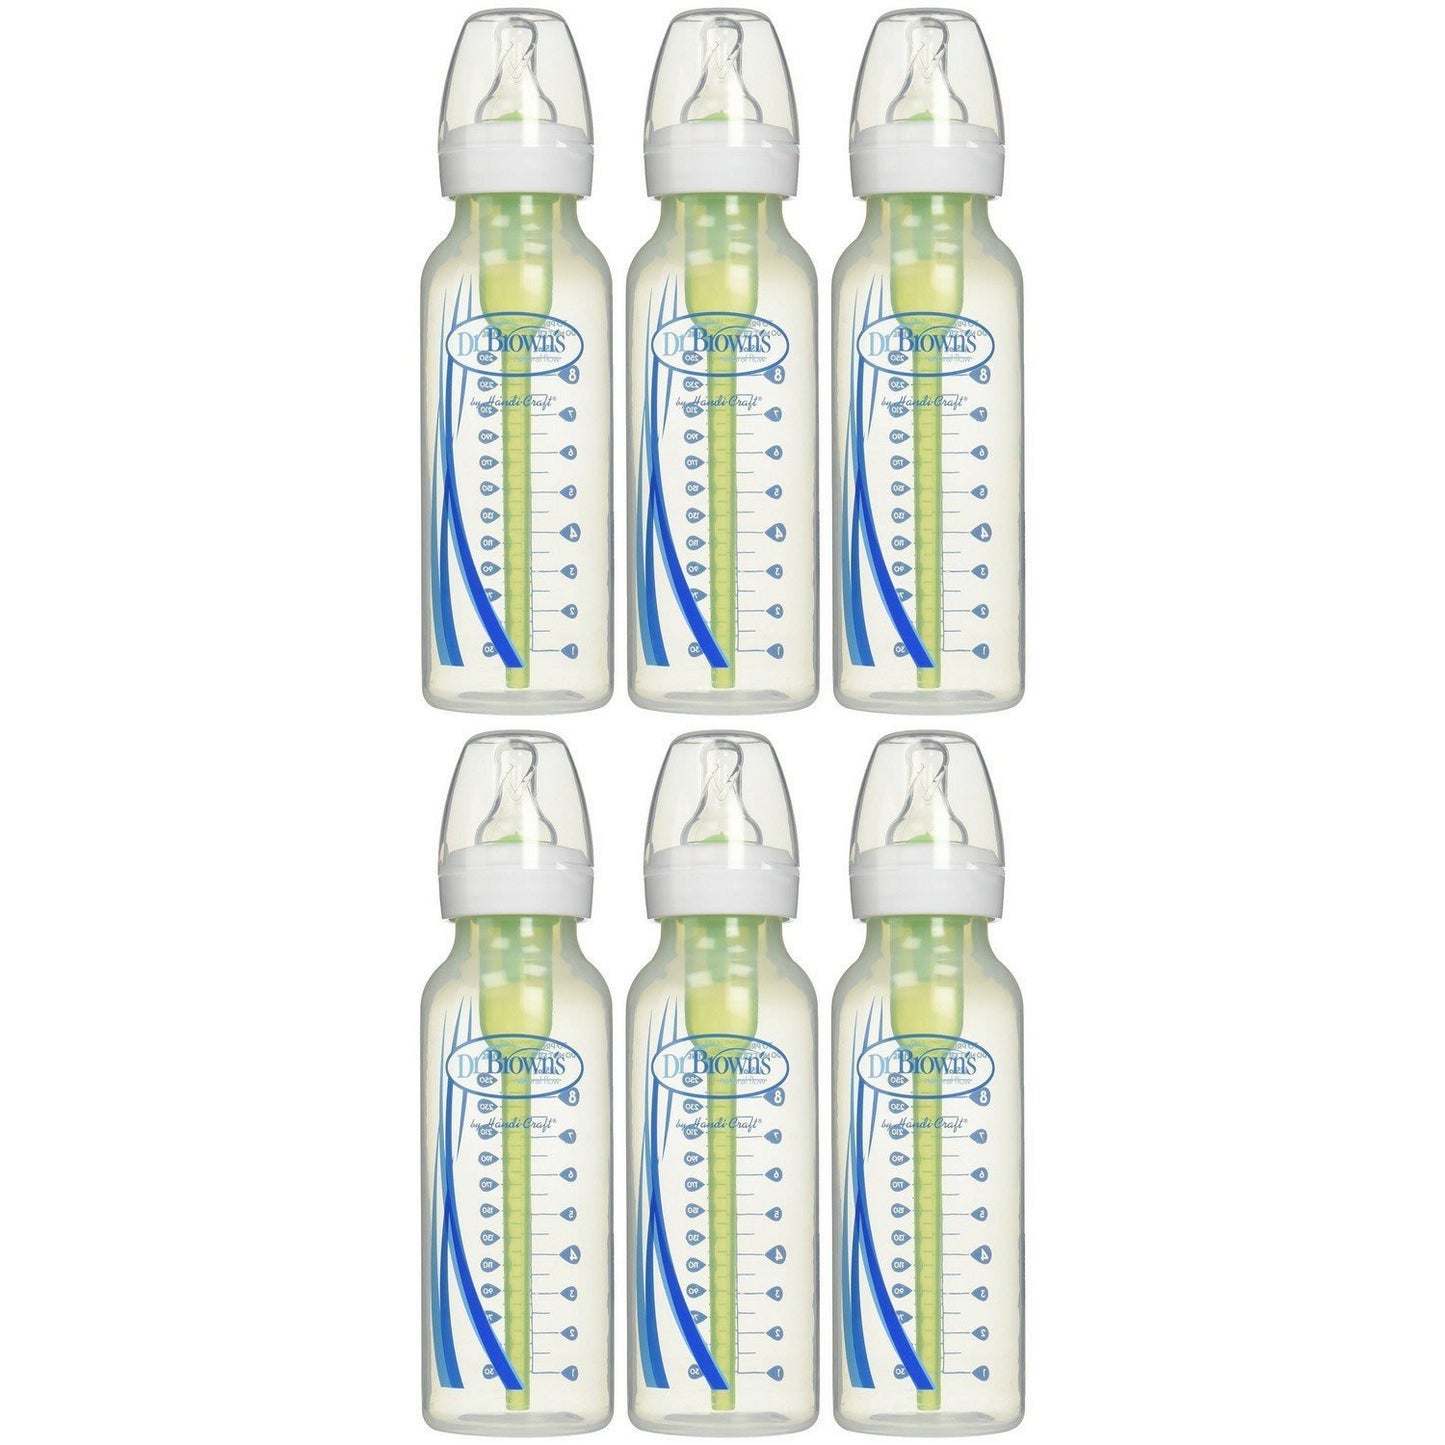 Dr. Brown's Bottles 6 Count (8 Oz), Option Bottles Can Be Used with or Without The Vent